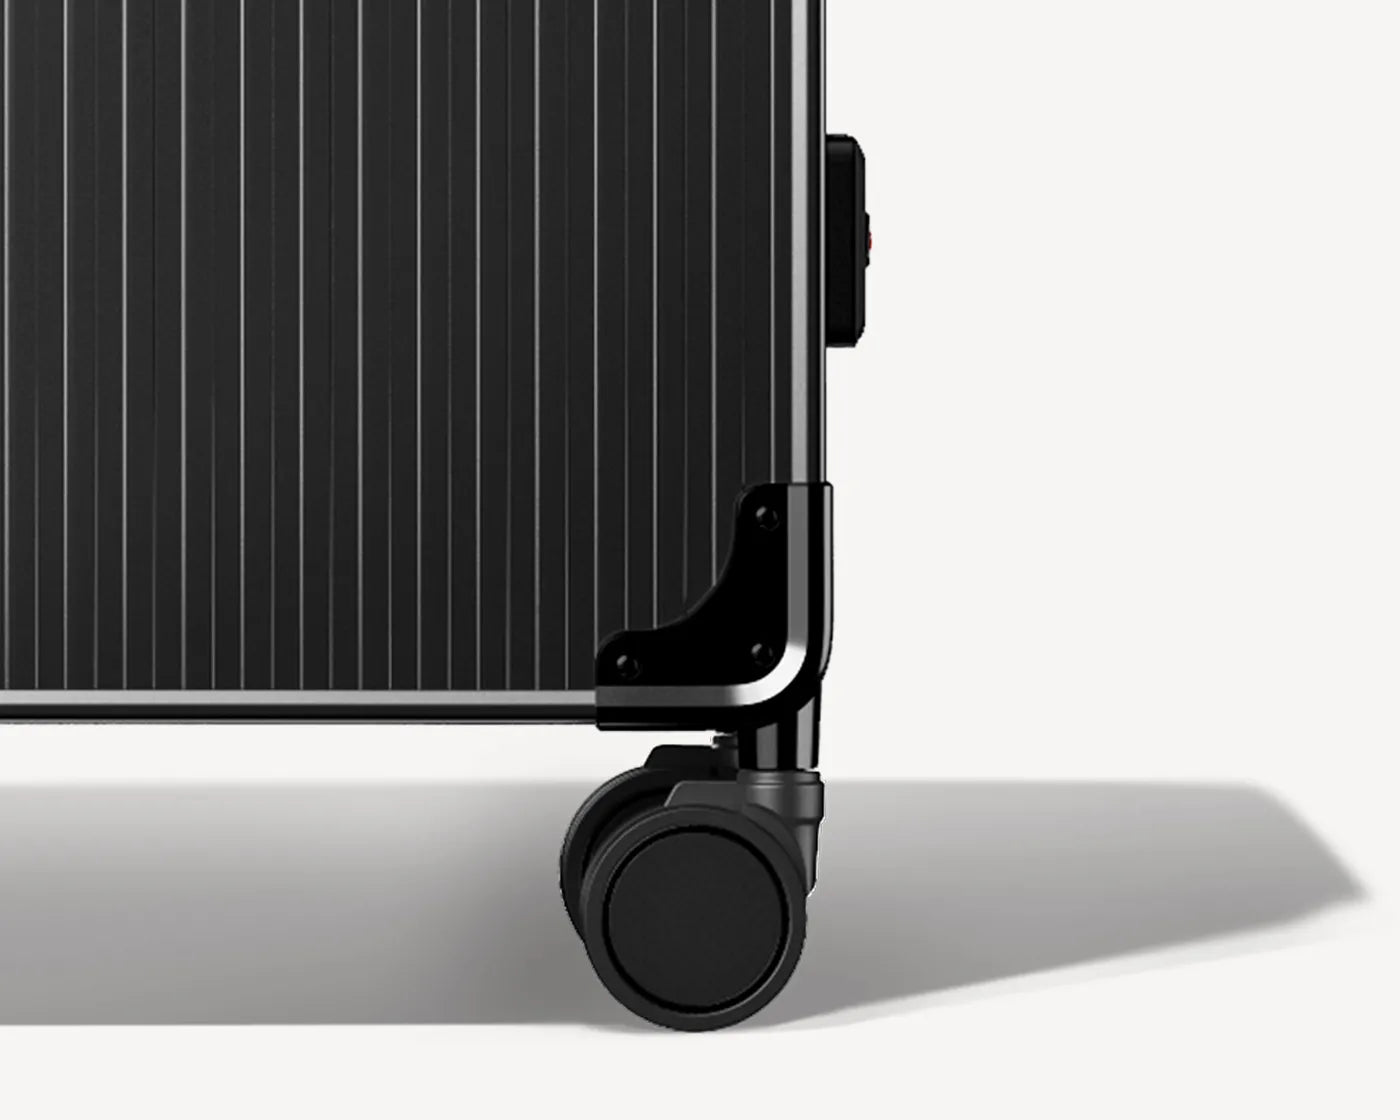 Detail image of a black ribbed luggage lying on its side, focusing on the lower corner with a durable wheel and a black protective bumper, against a white background with a subtle shadow underneath indicating the suitcase is raised above the surface.